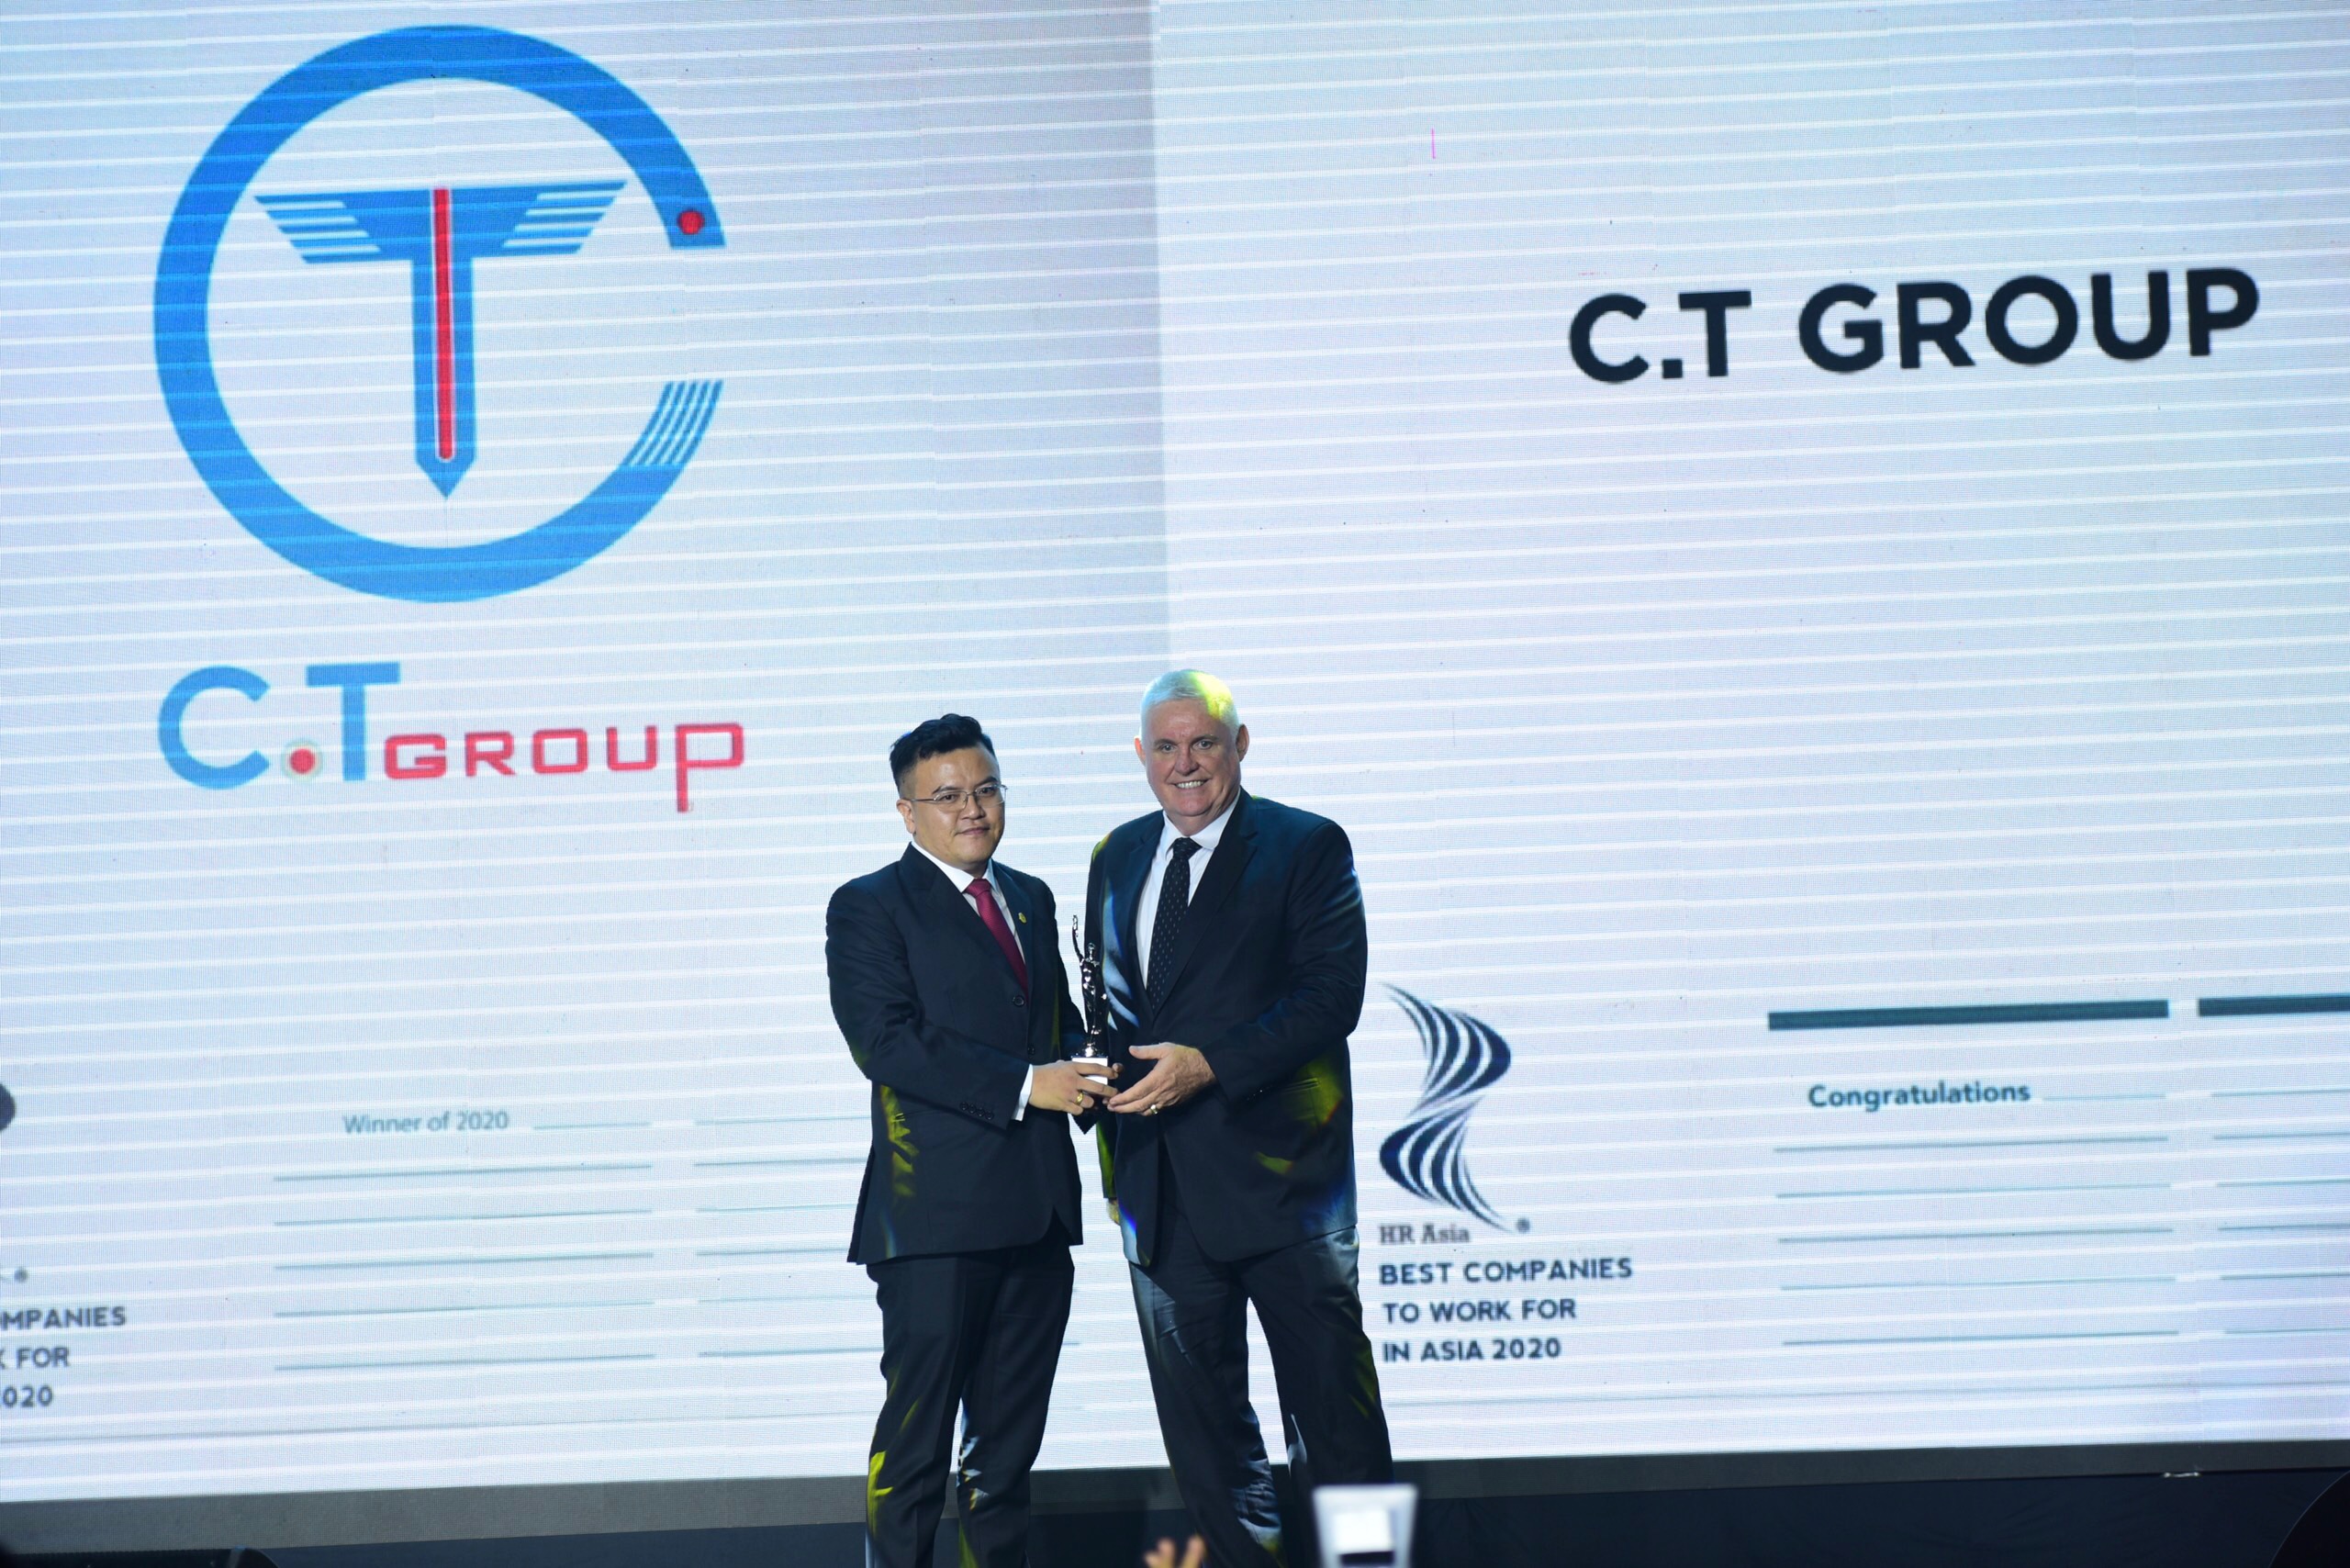 C.T Group receives 'Best Companies to Work For in Asia' award